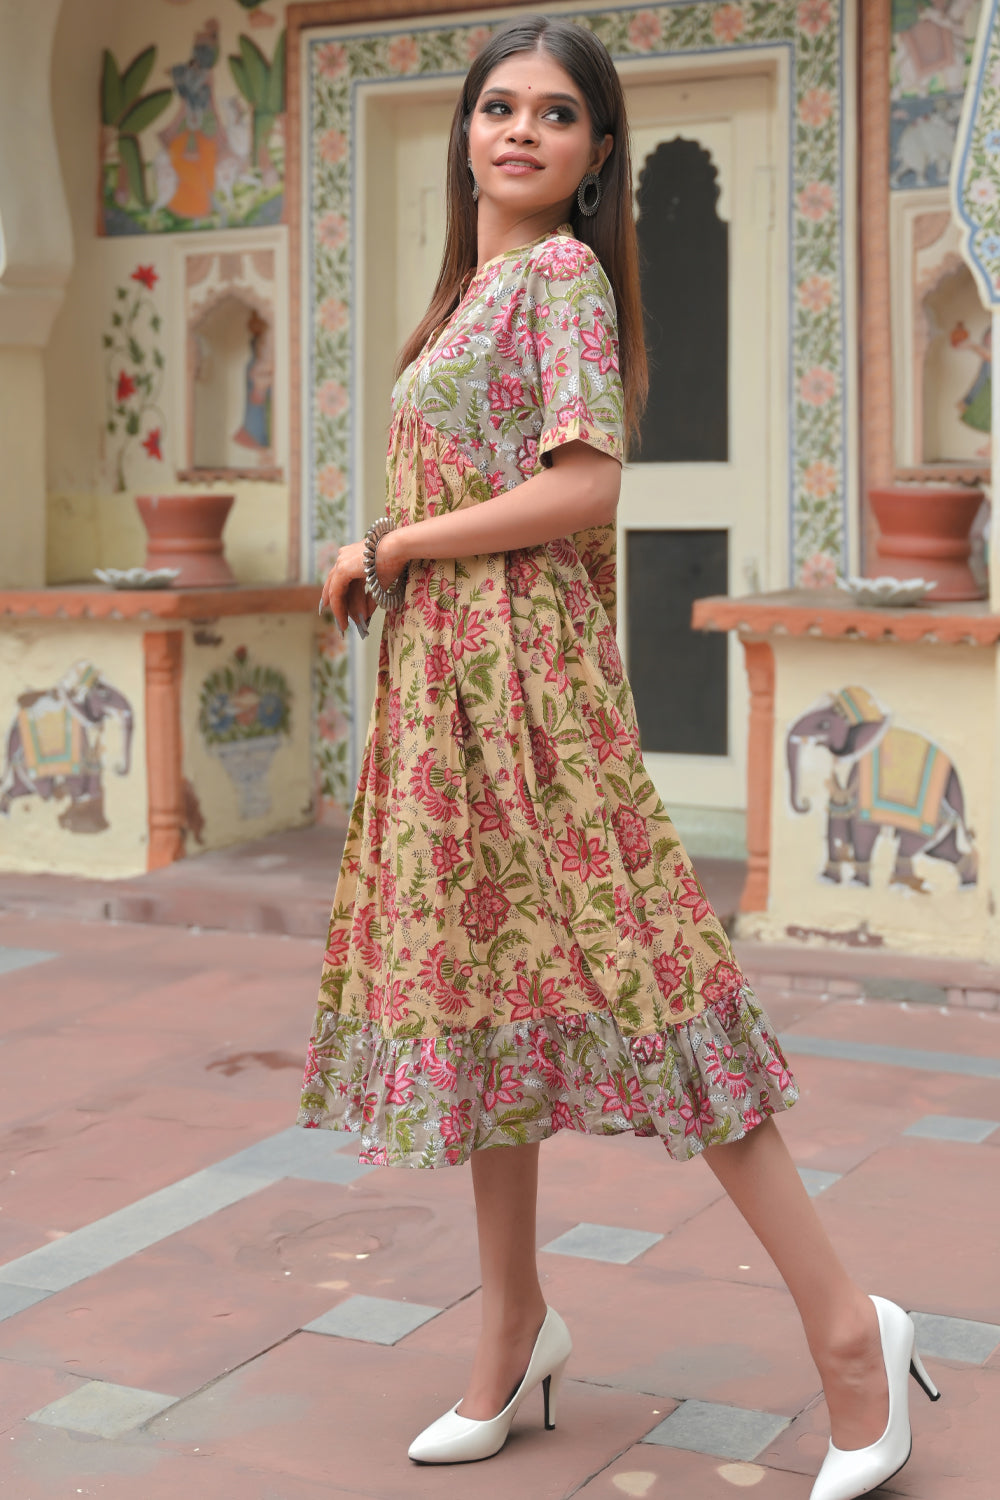 Shades of Dhara dress Dusty Pastel Floral Dress | Made To Order